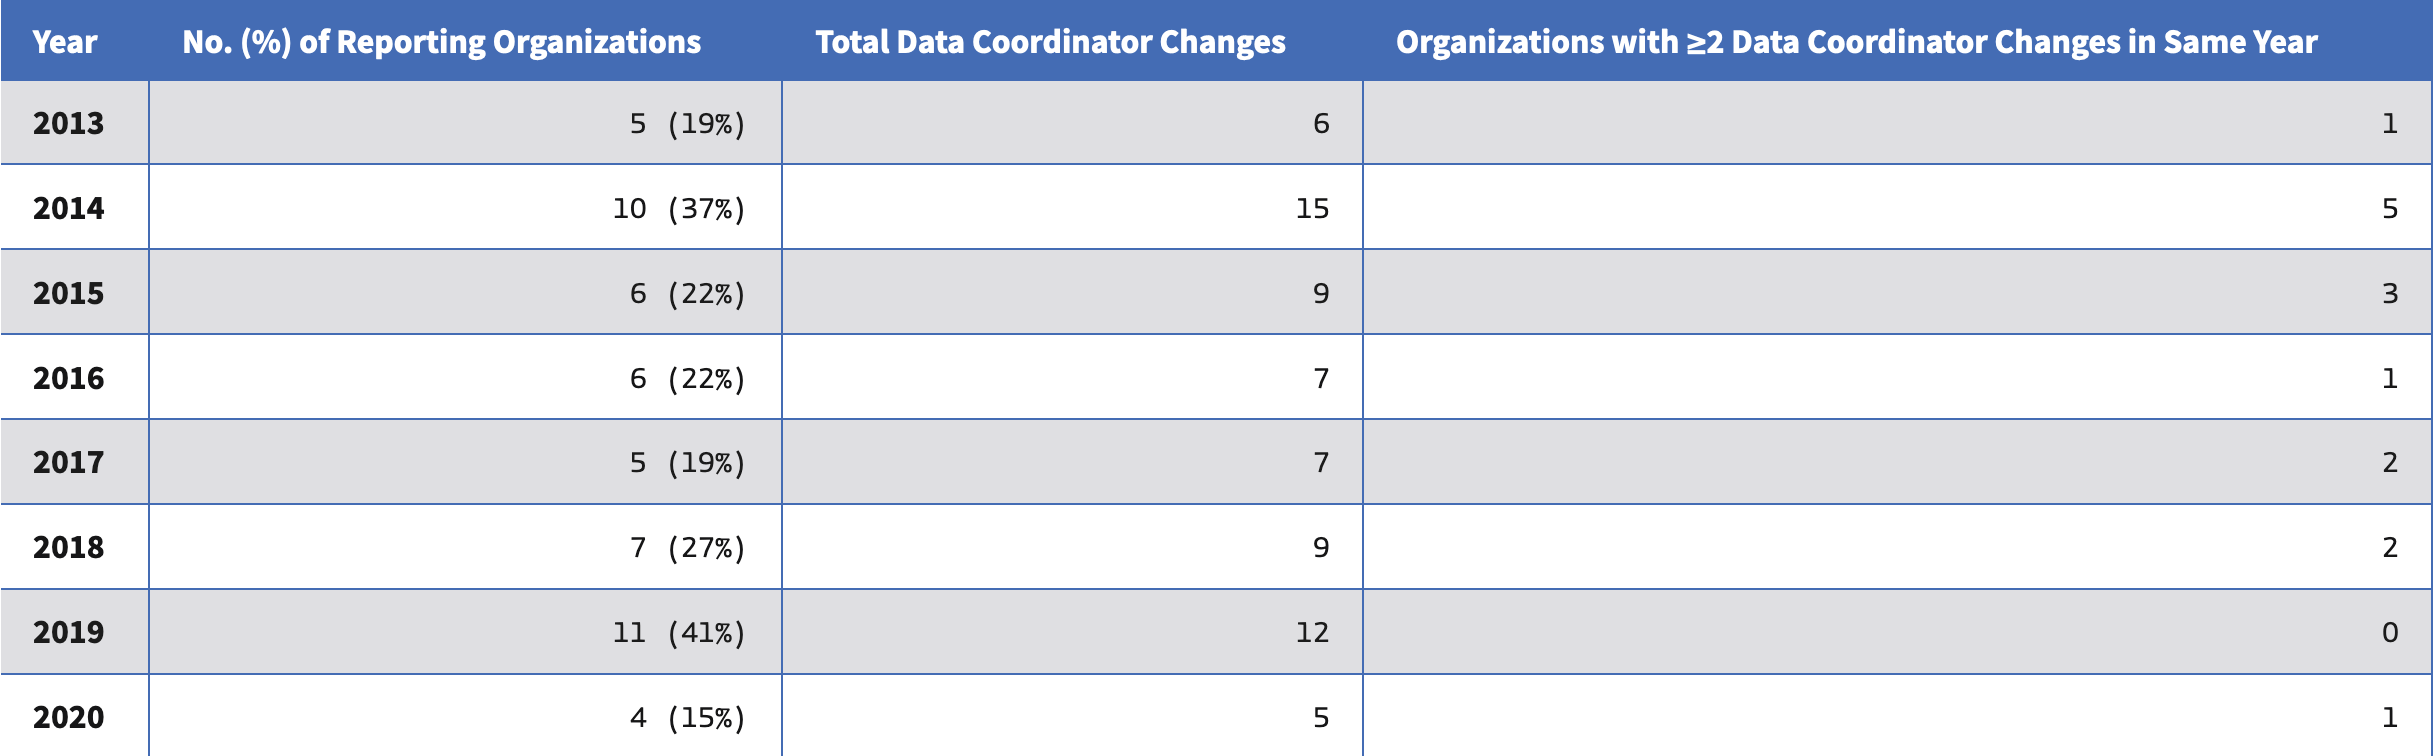 Data Coordinator Changes by Reporting Organization (2013-2020) infographic